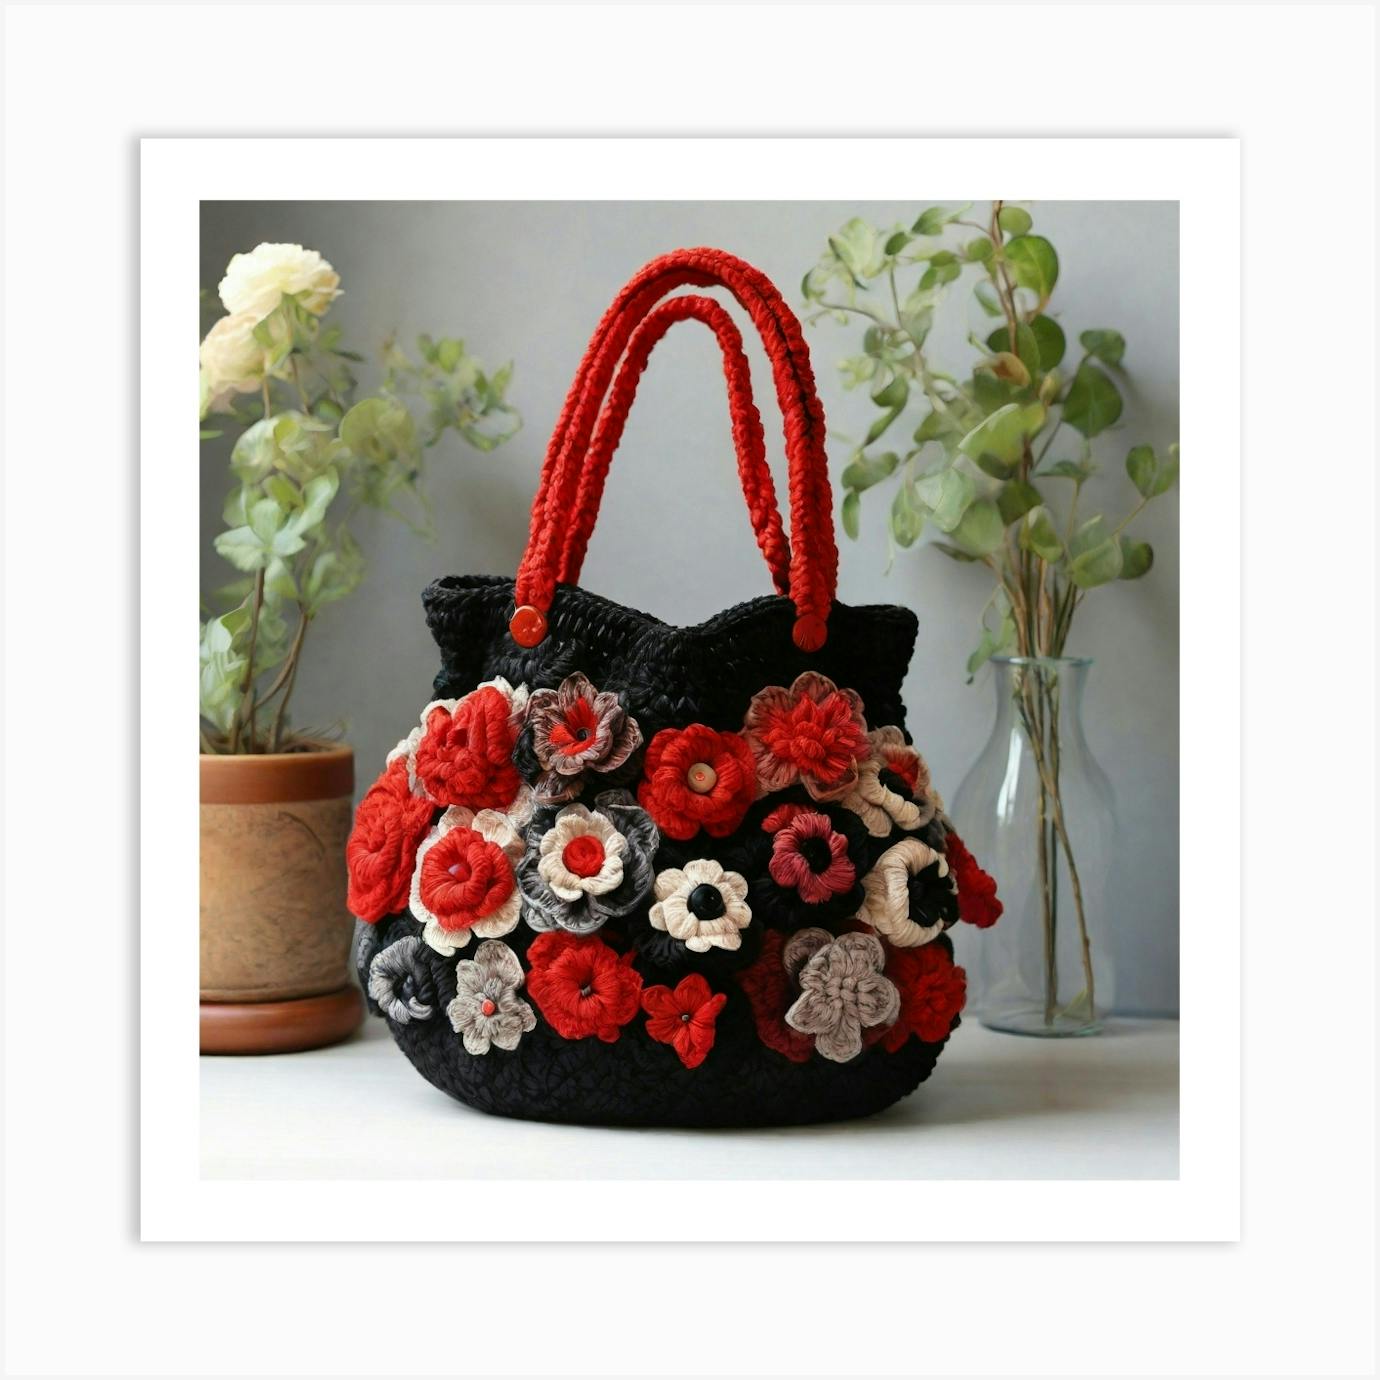 Crochet bag, Flower-shaped bag, Pattern No19, in both UK and US crochet  terms